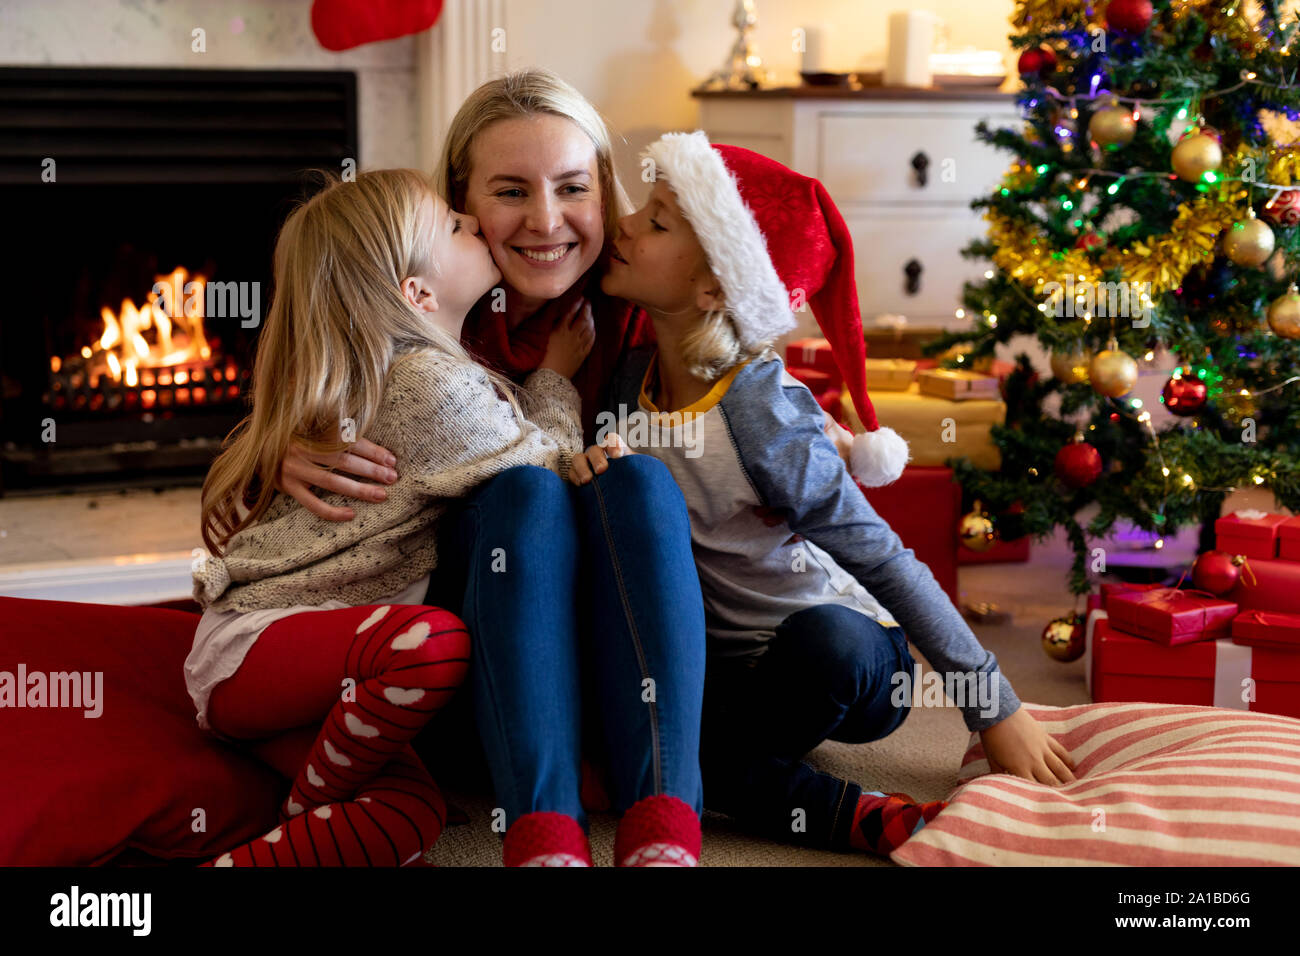 Family at home at Christmas time Stock Photo